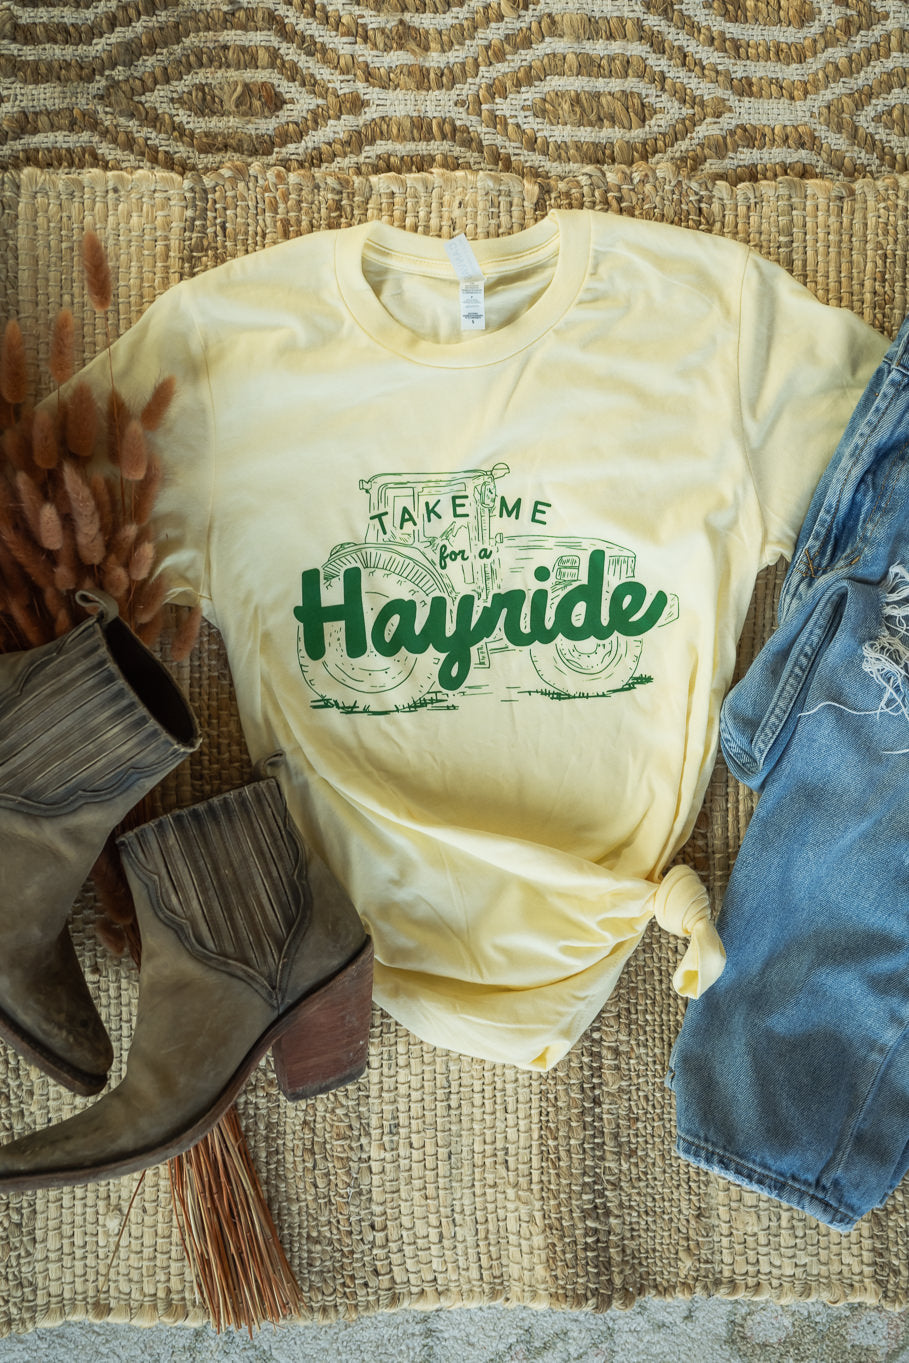 Take Me For A Hayride Graphic Tee (Adult, Toddler, Youth)